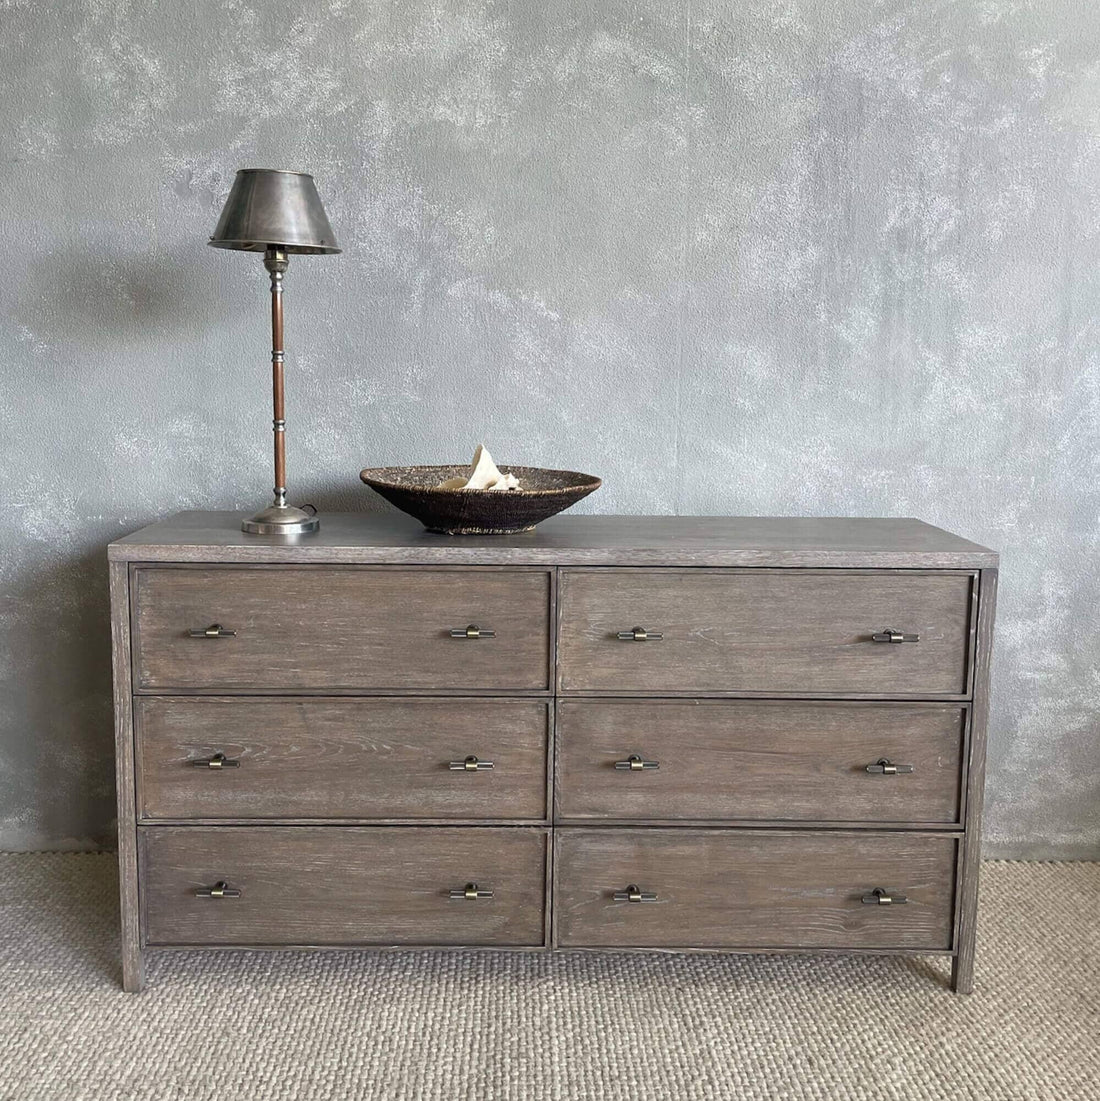 Sorrento Chest of Drawers L1600mm - Smoked Grey Bedroom Furniture Beachwood Designs 